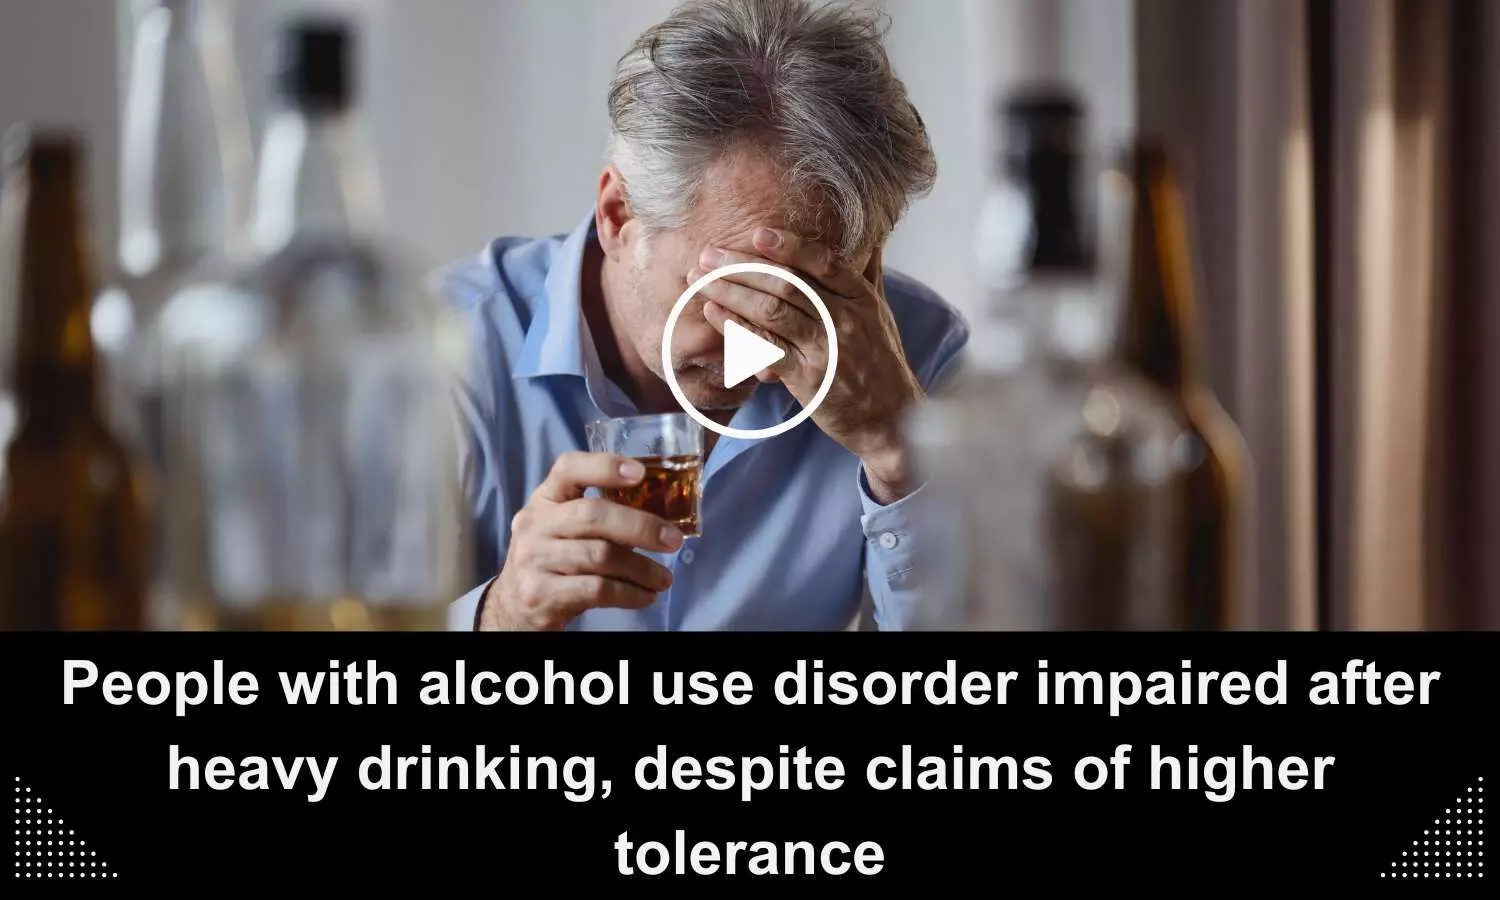 People with alcohol use disorder impaired after heavy drinking, despite claims of higher tolerance